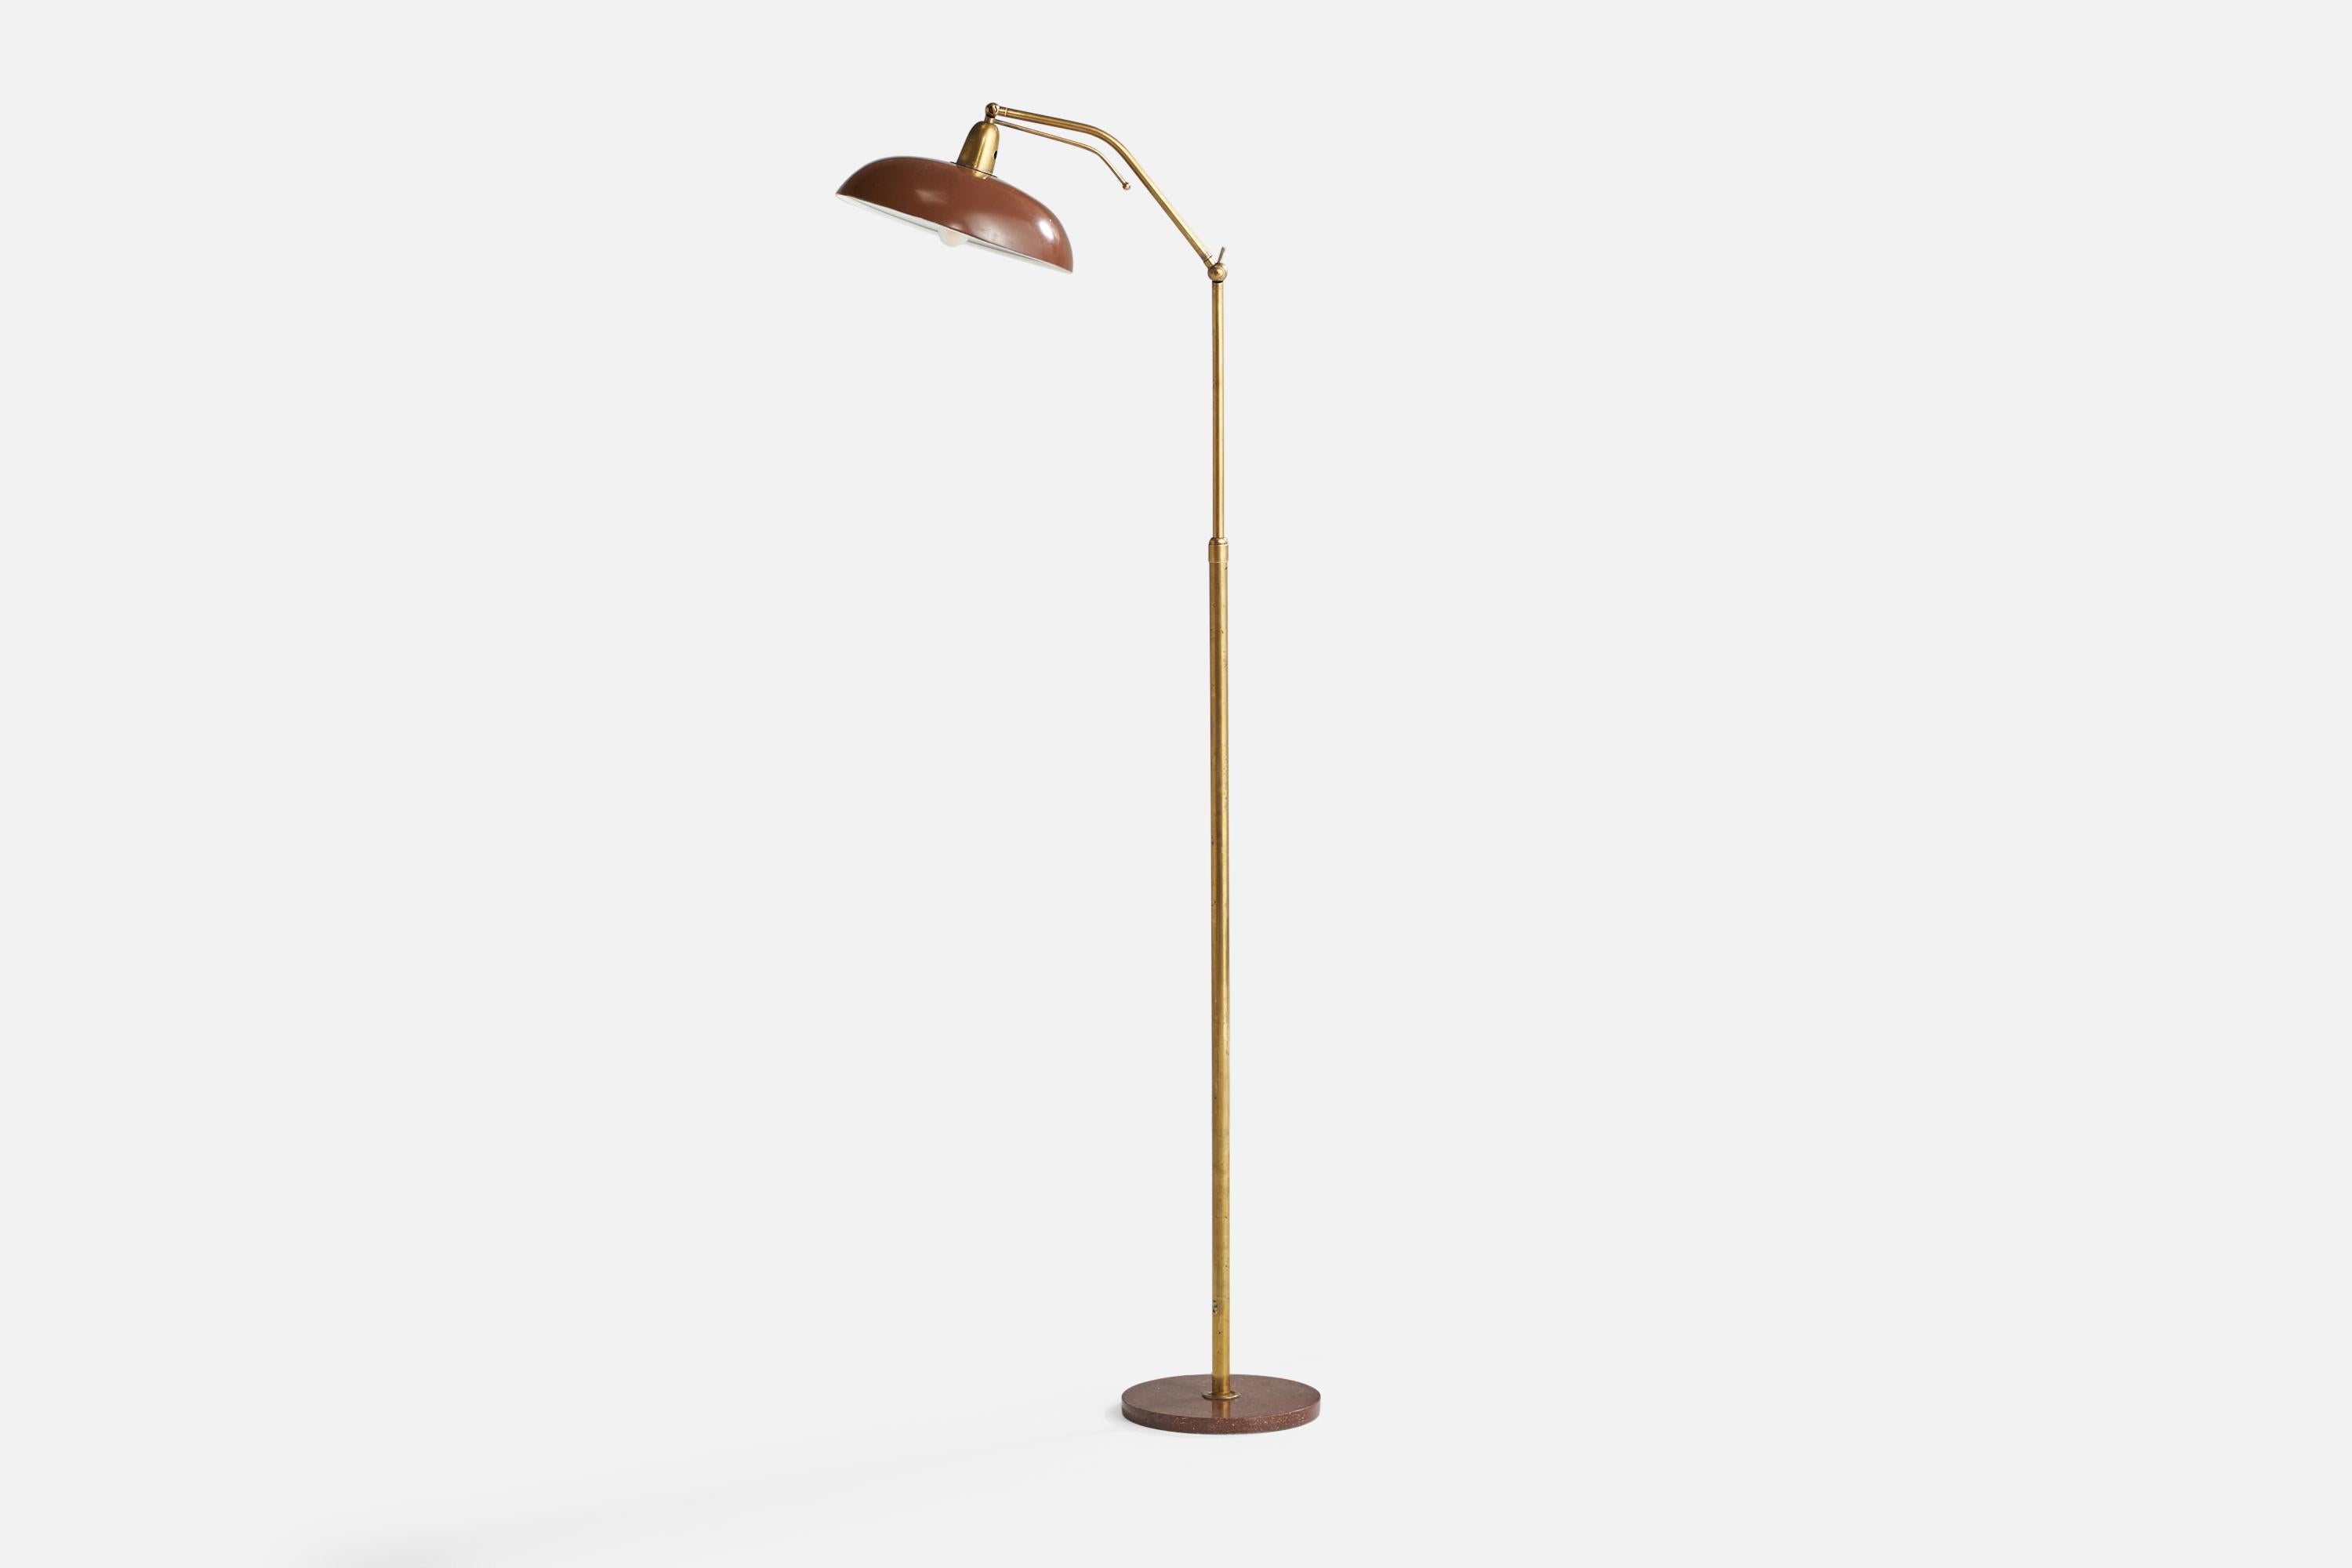 An adjustable brass, marble and brown-lacquered metal floor lamp designed and produced in Italy, 1950s.

Overall Dimensions (inches): 63.8” H x 11.5” W x 24” D
Bulb Specifications: E-26 Bulb
Number of Sockets: 1
 
All lighting will be converted for